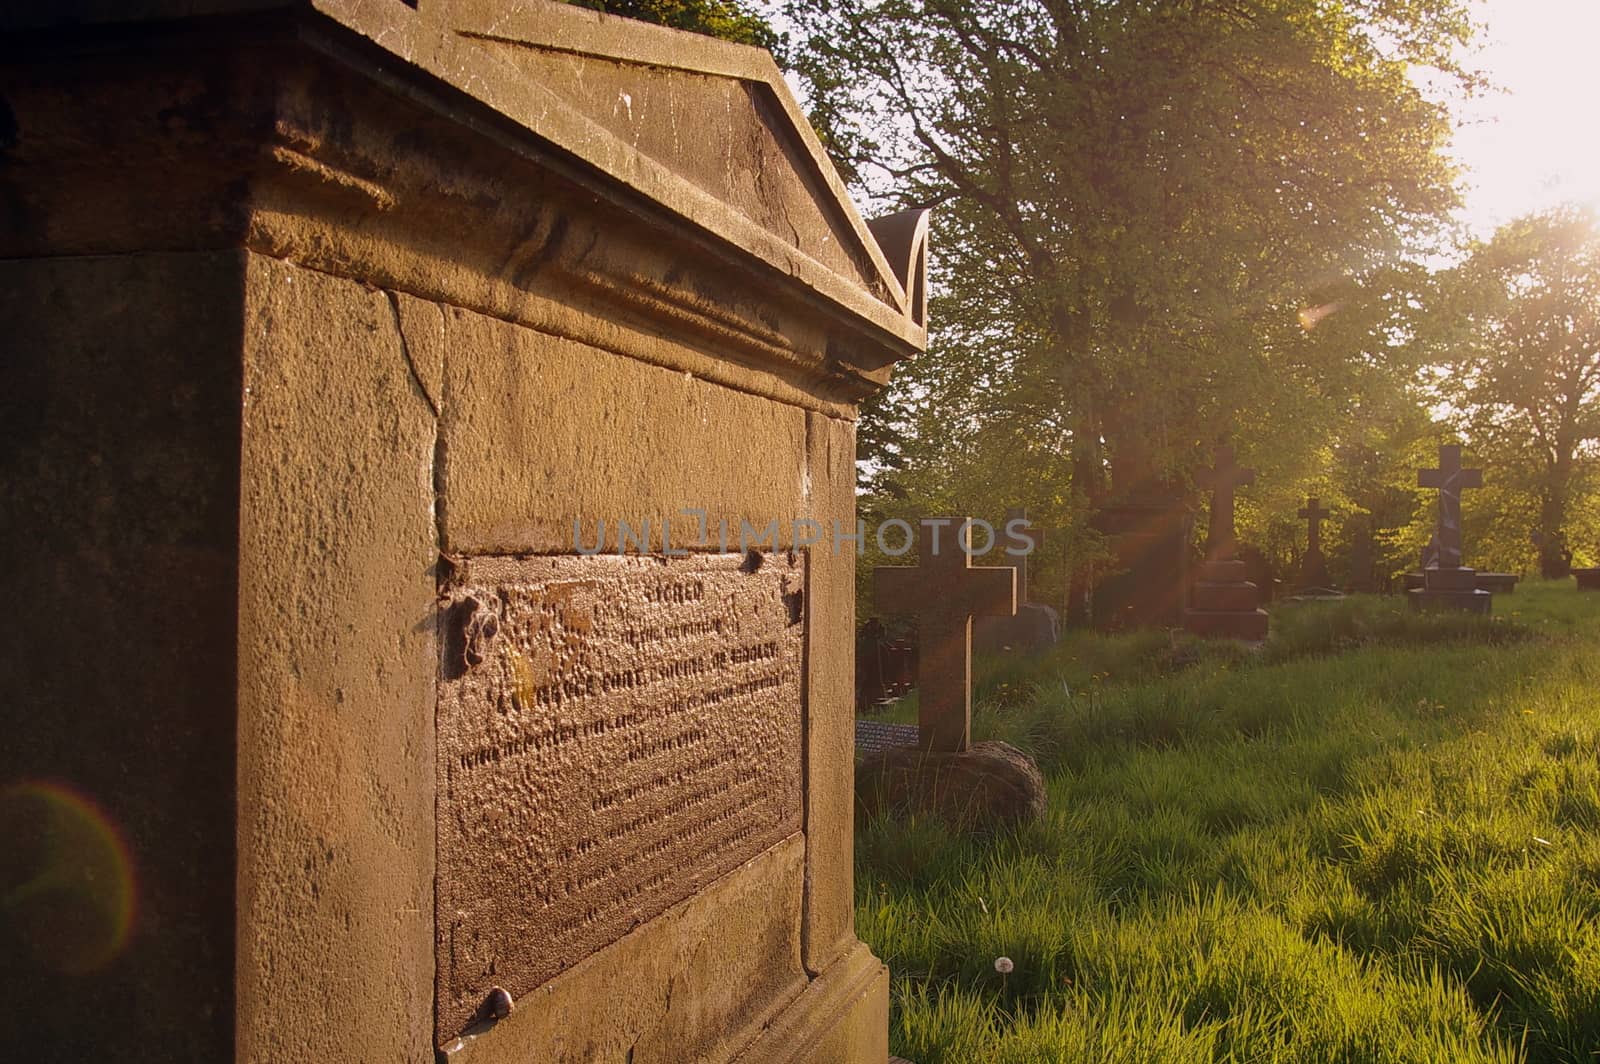 Tomb at sunset, in the graveyard of St. Mary's Church, Prestwich, Manchester, UK